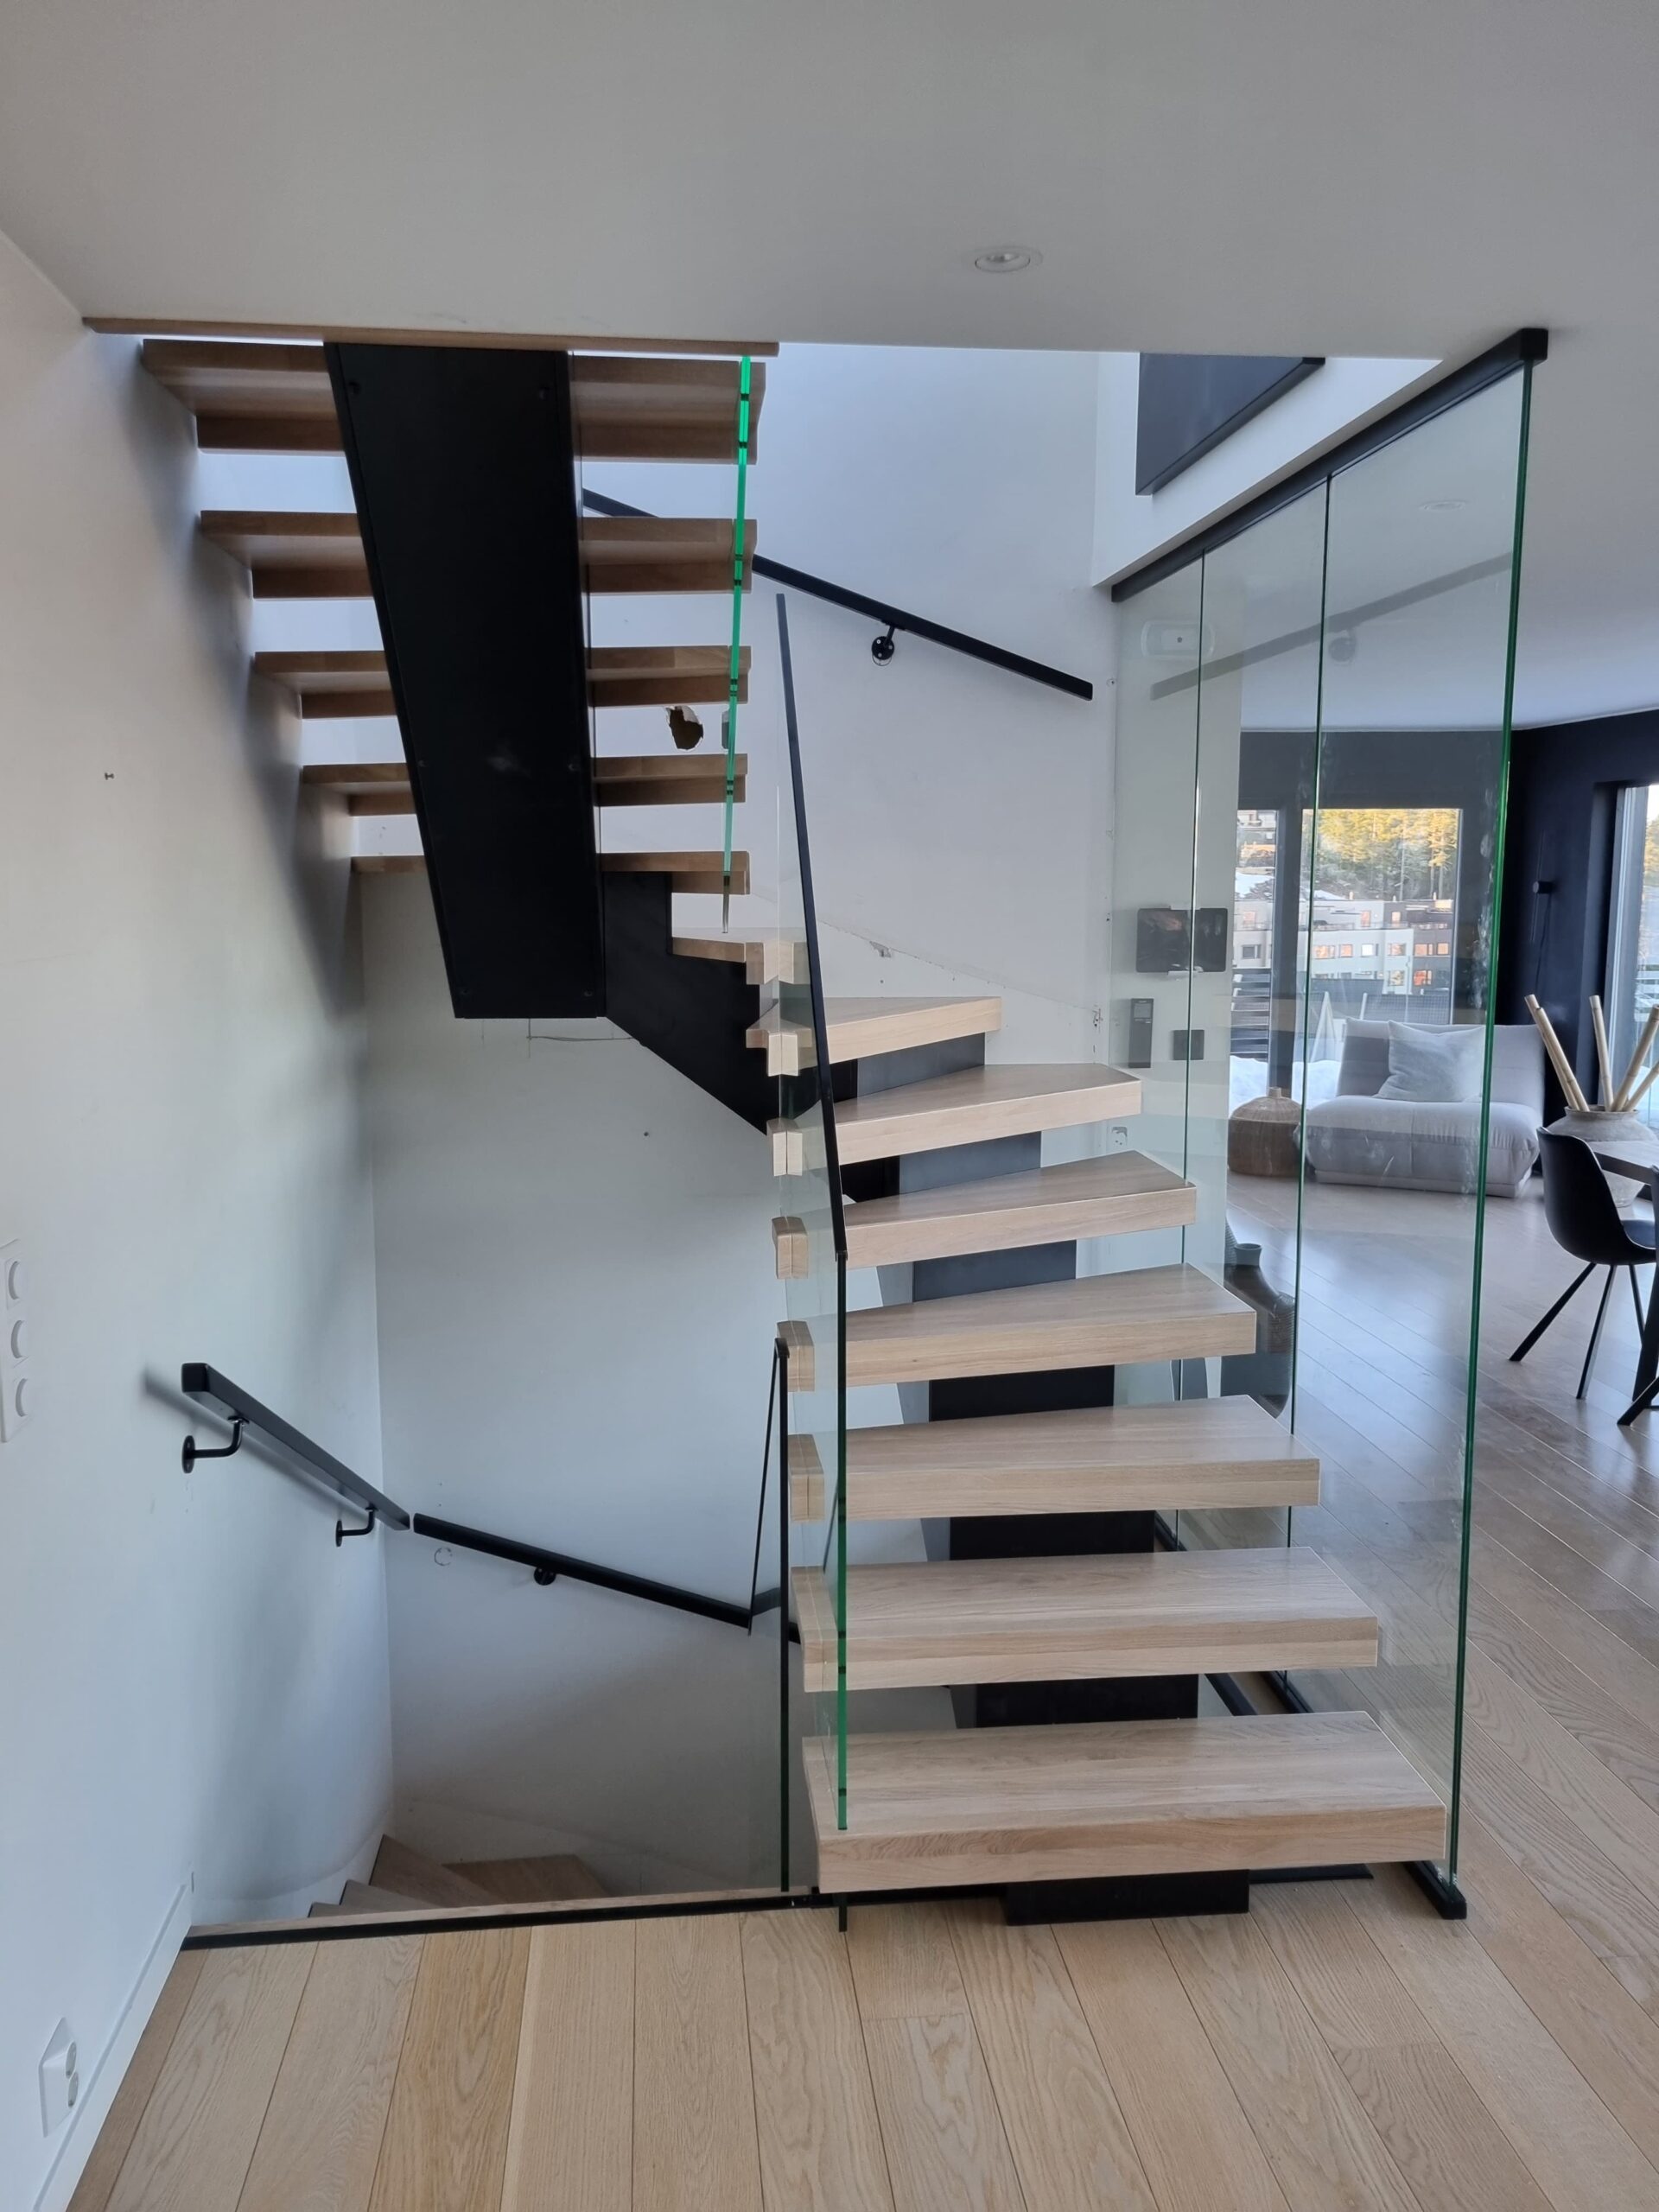 11. A staircase through two floors with glass railing and a central beam